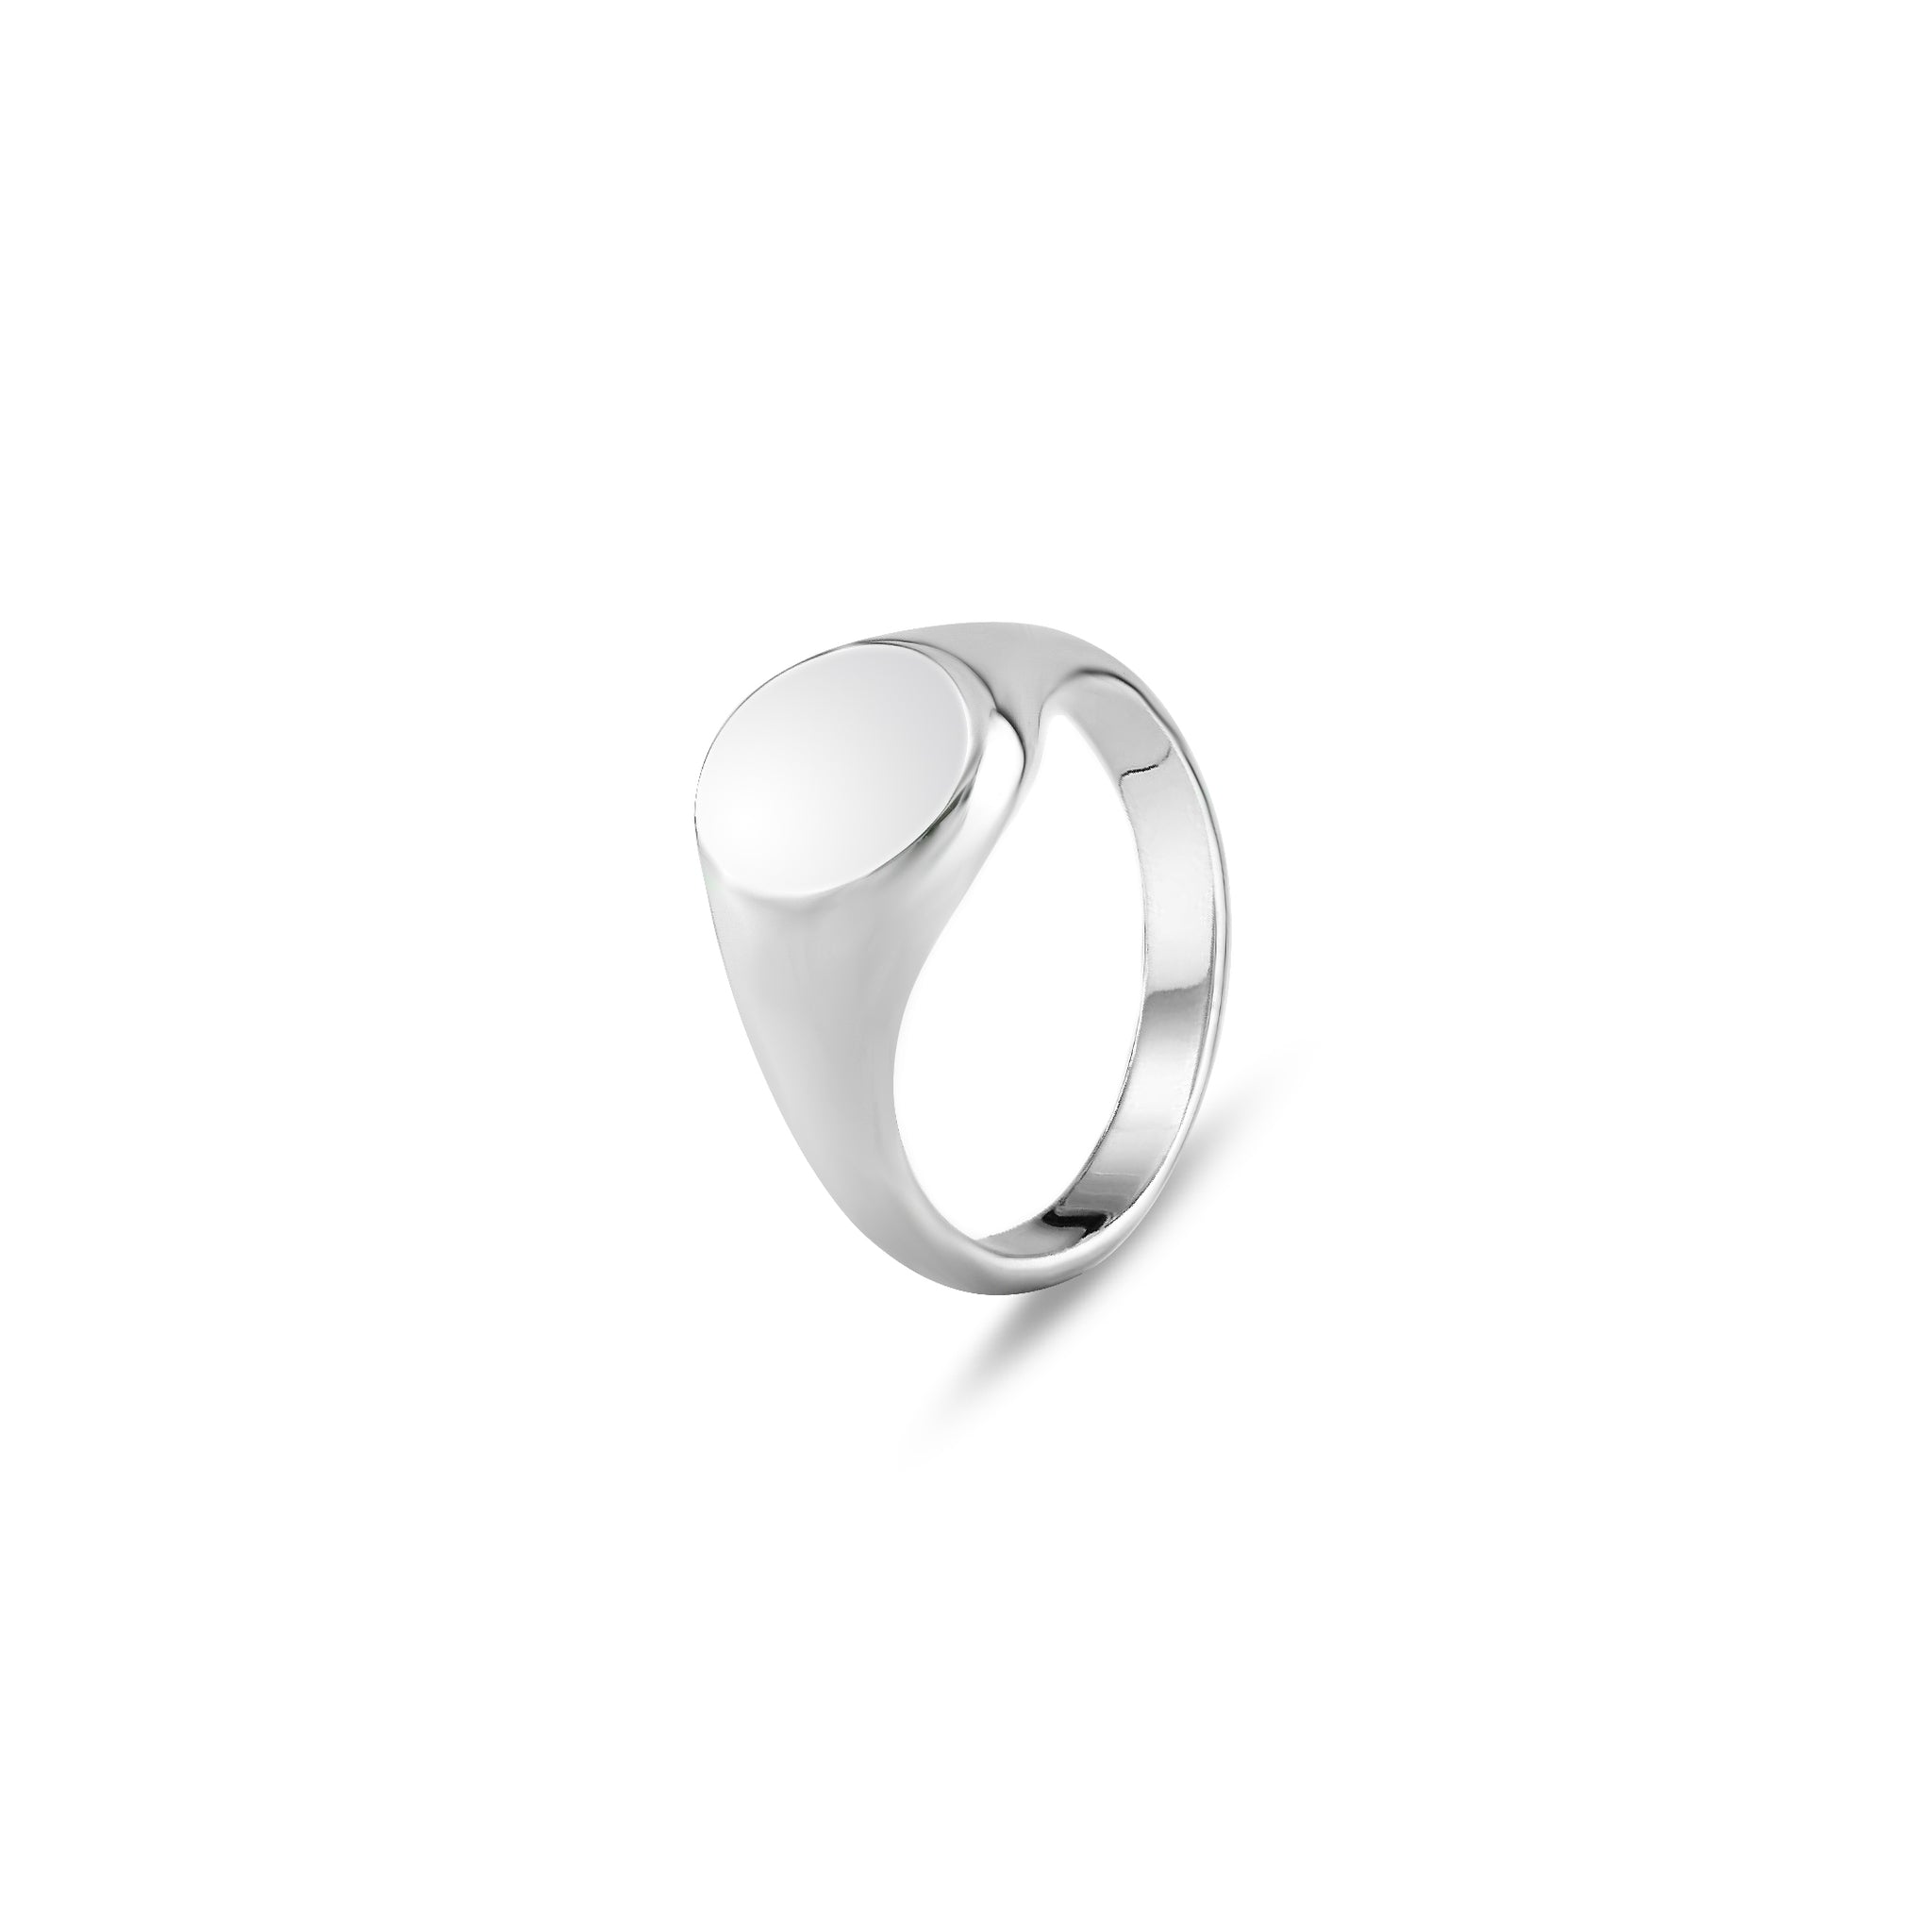 9ct White Gold 11 x 9mm Oval Signet Ring